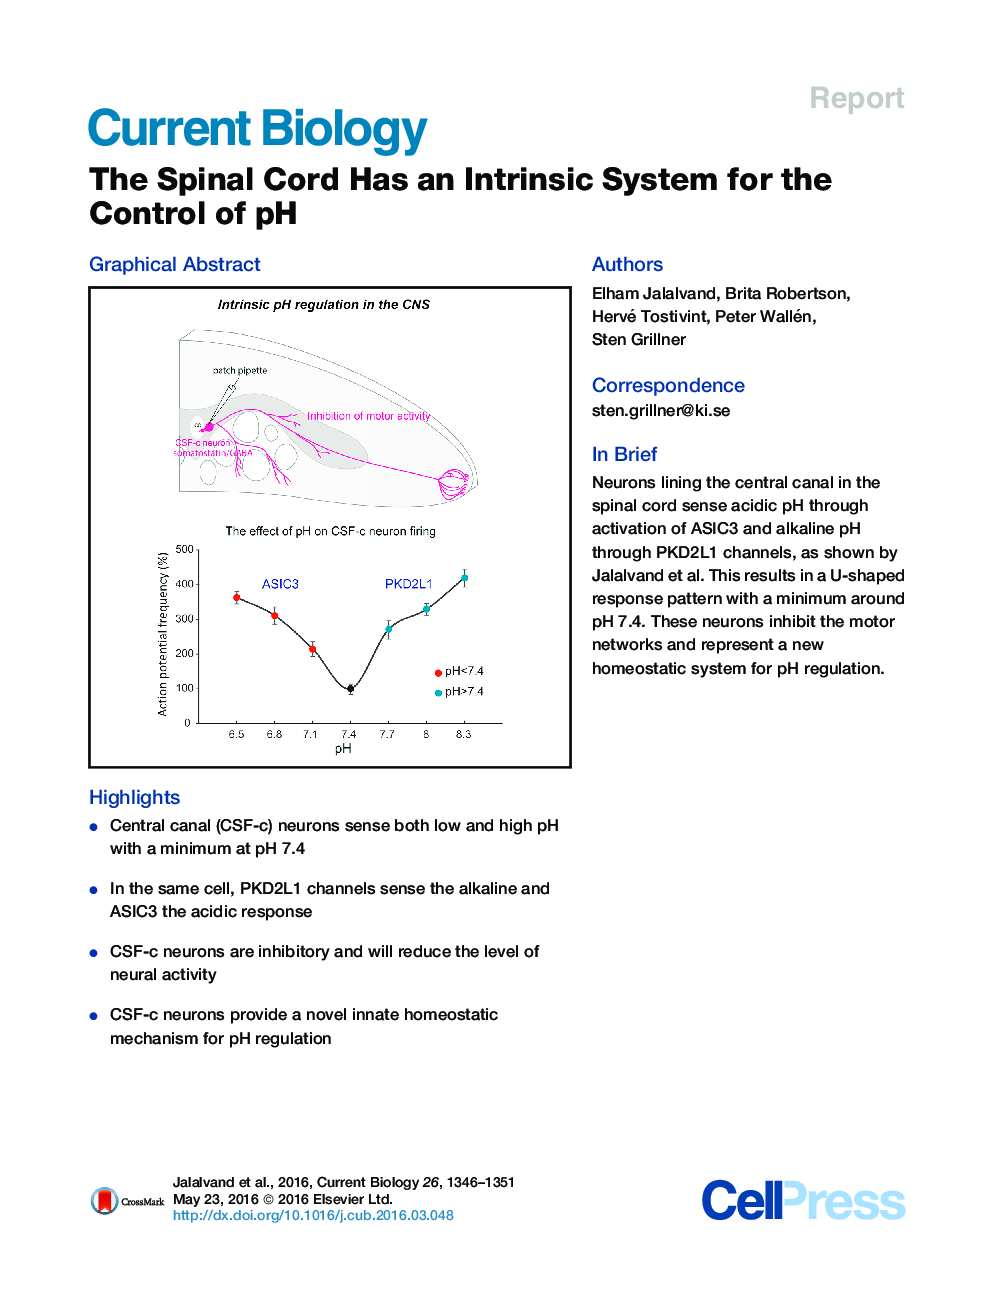 The Spinal Cord Has an Intrinsic System for the Control of pH